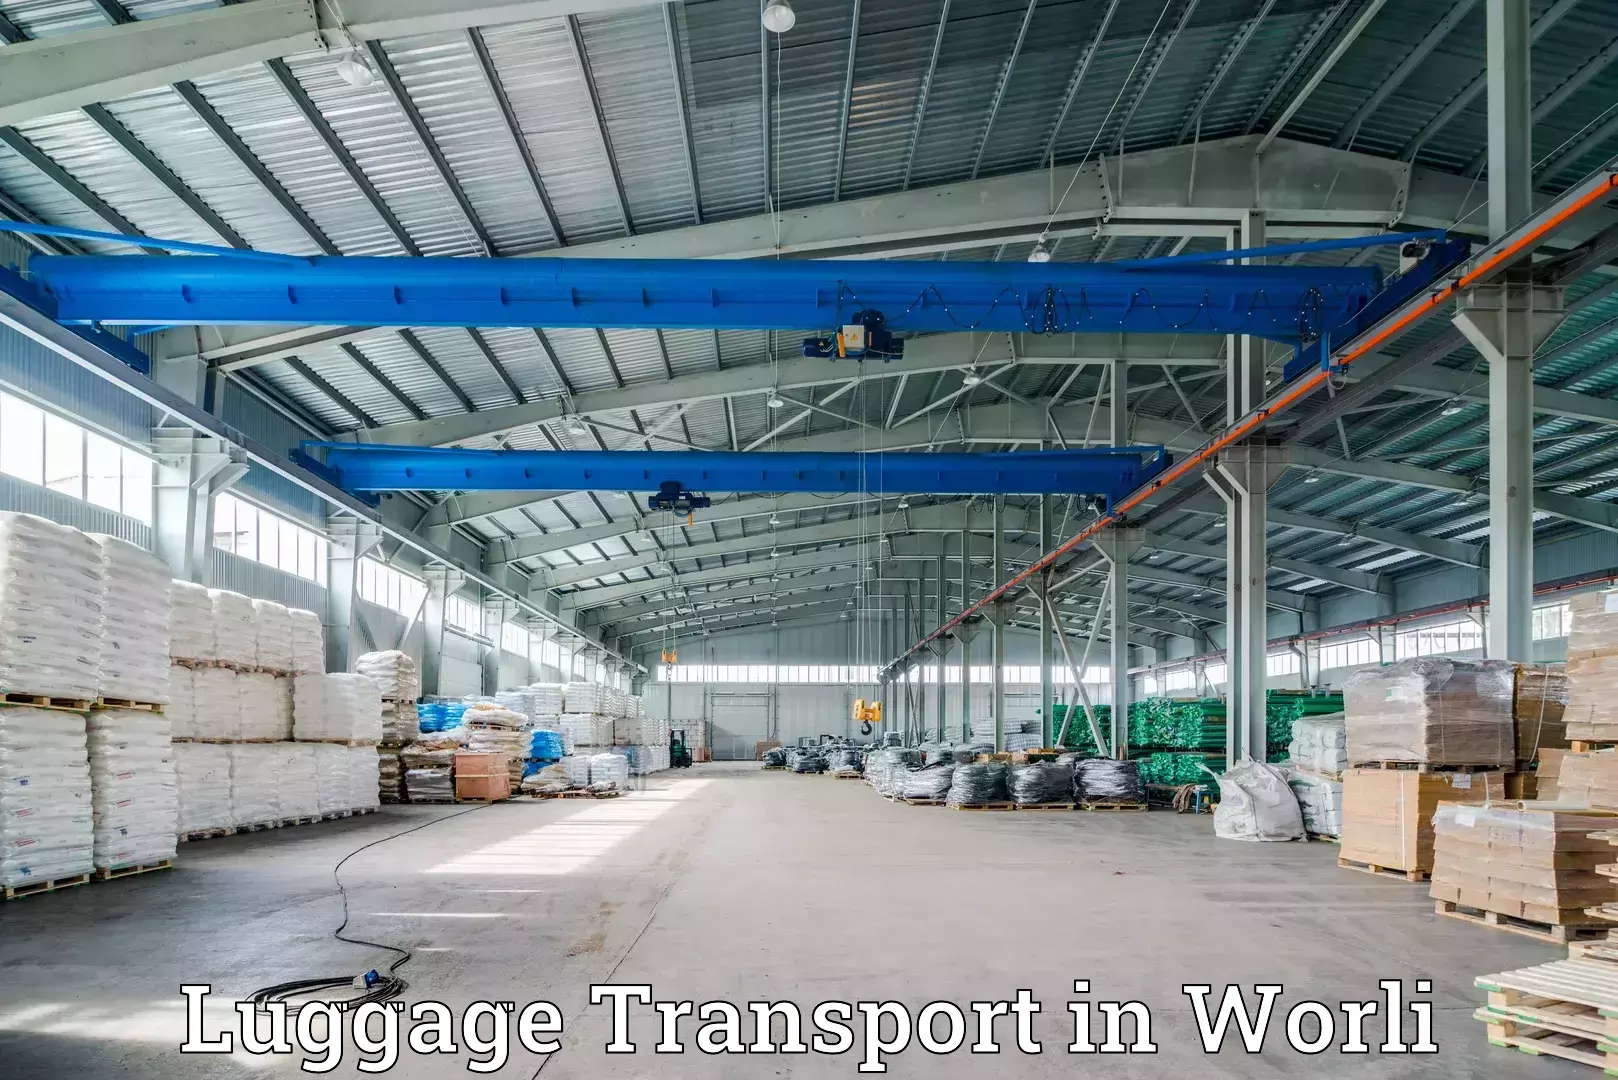 Baggage delivery support in Worli